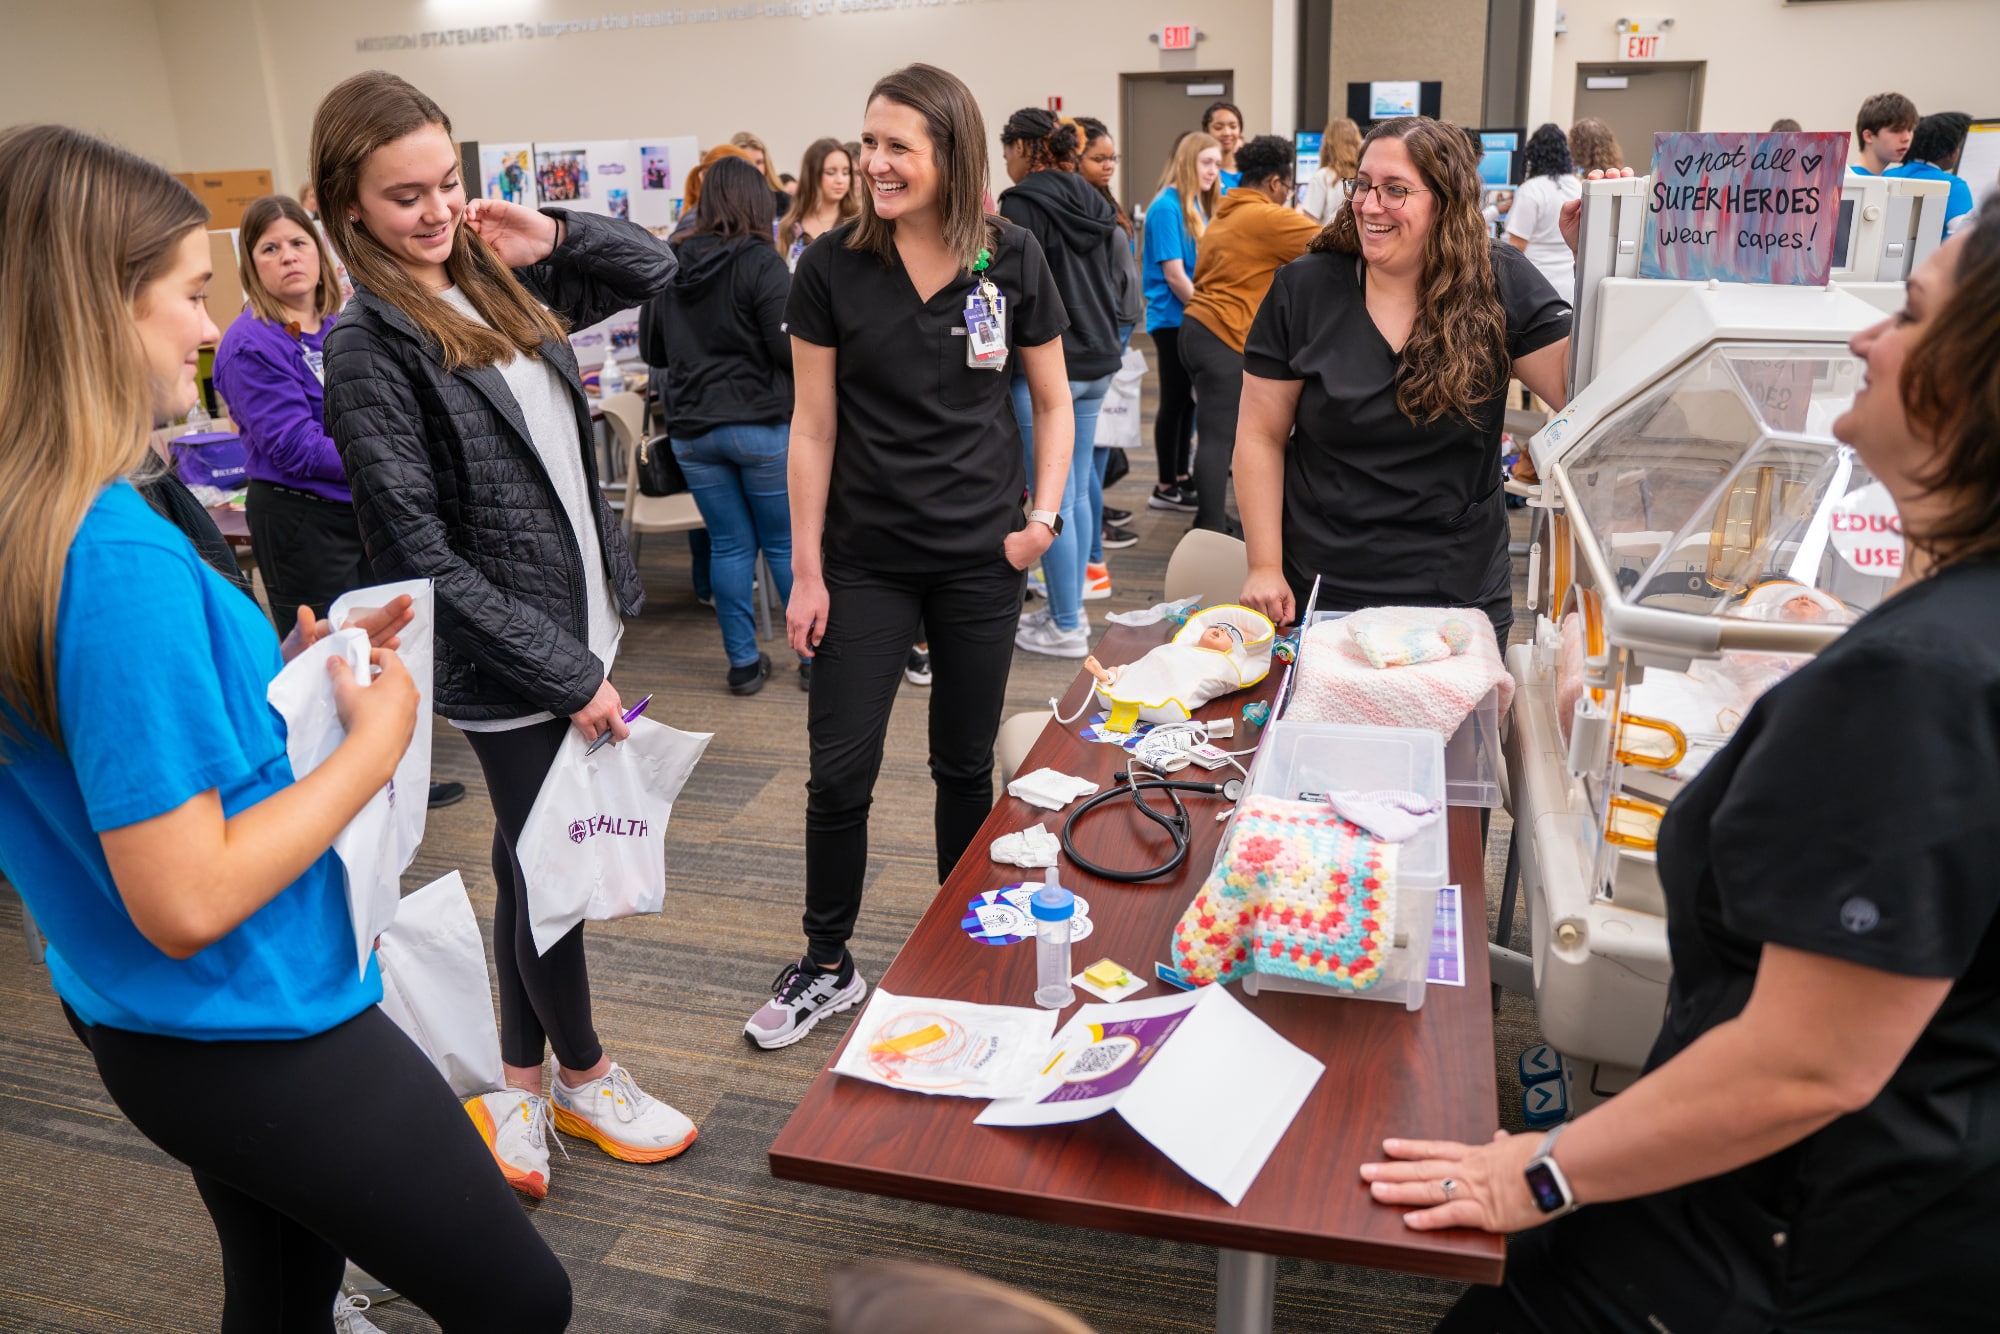 Students discuss a career in health care with ECU Health nurses at a station on pediatric care during the Health Sciences Academy career fair.